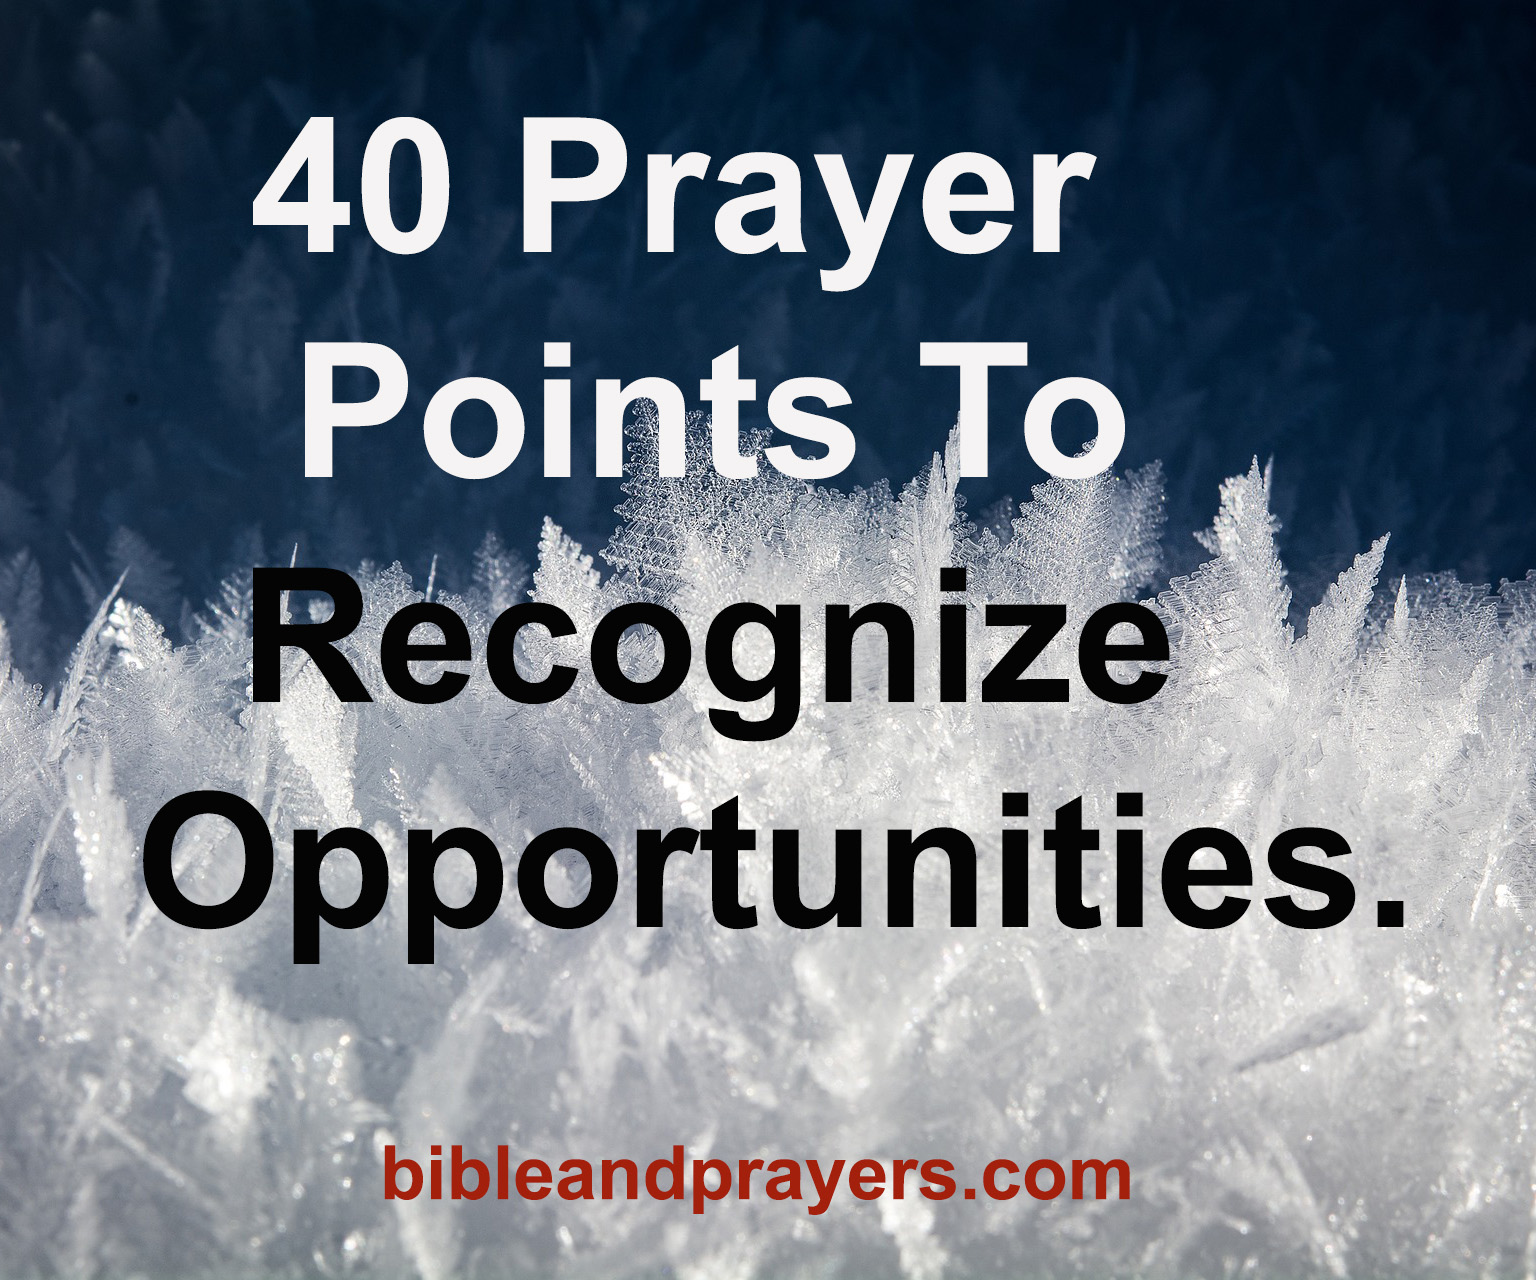 40 Prayer Points To Recognize Opportunities.